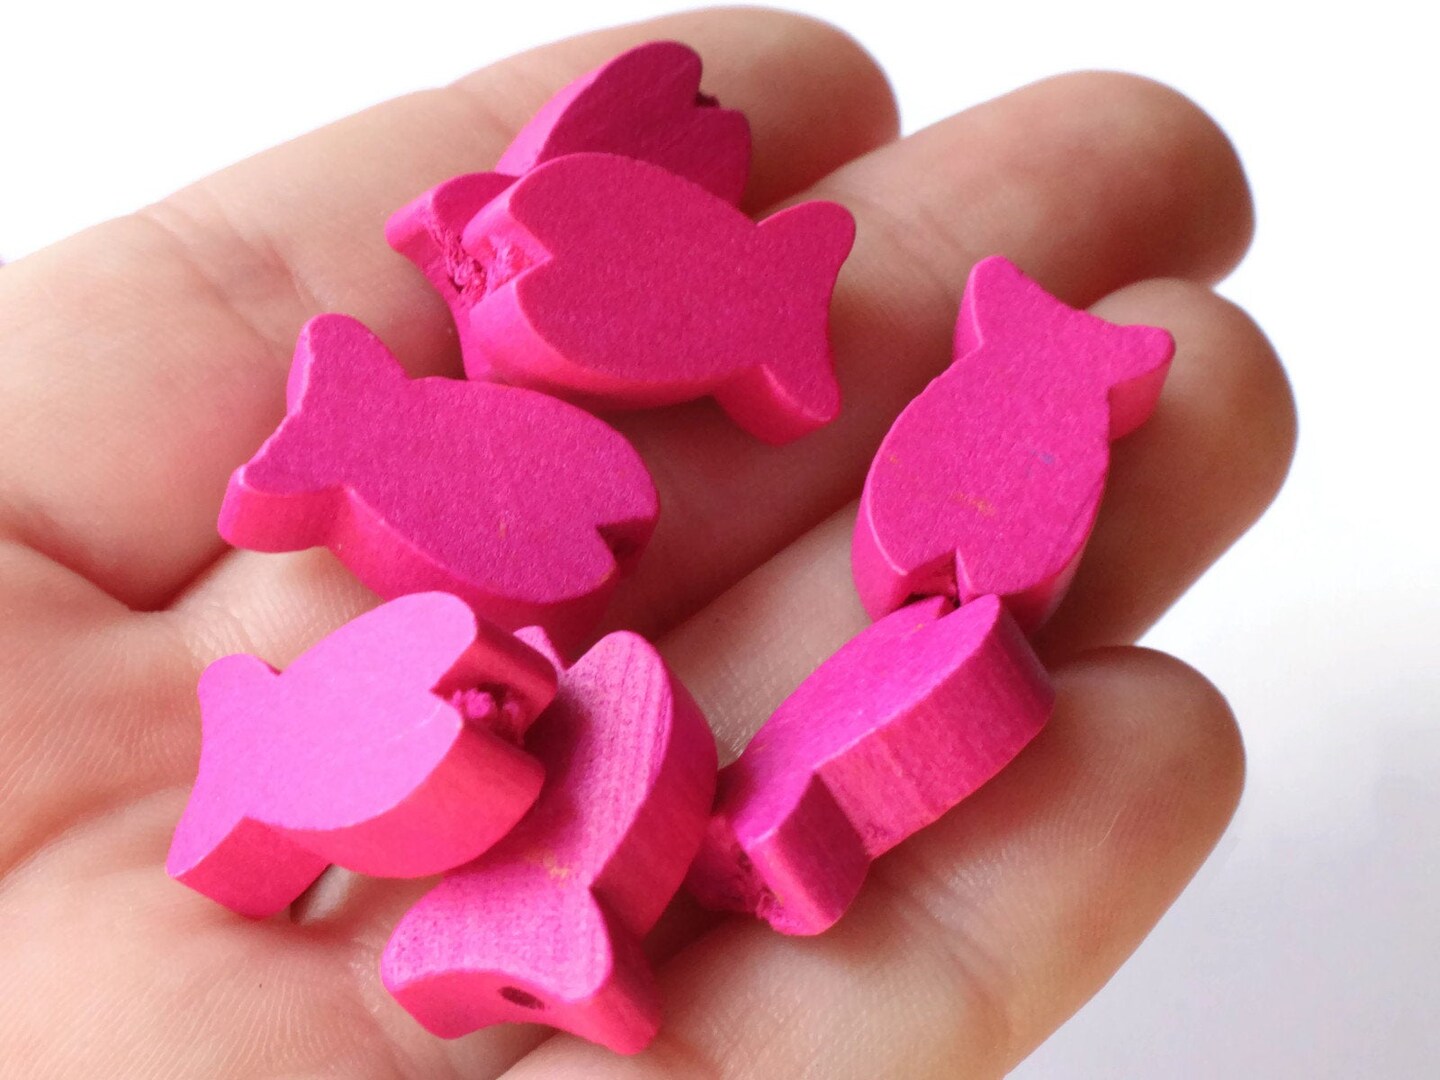 30 19mm Bright Pink Beads Wooden Fish Beads Wood Beads Animal Beads